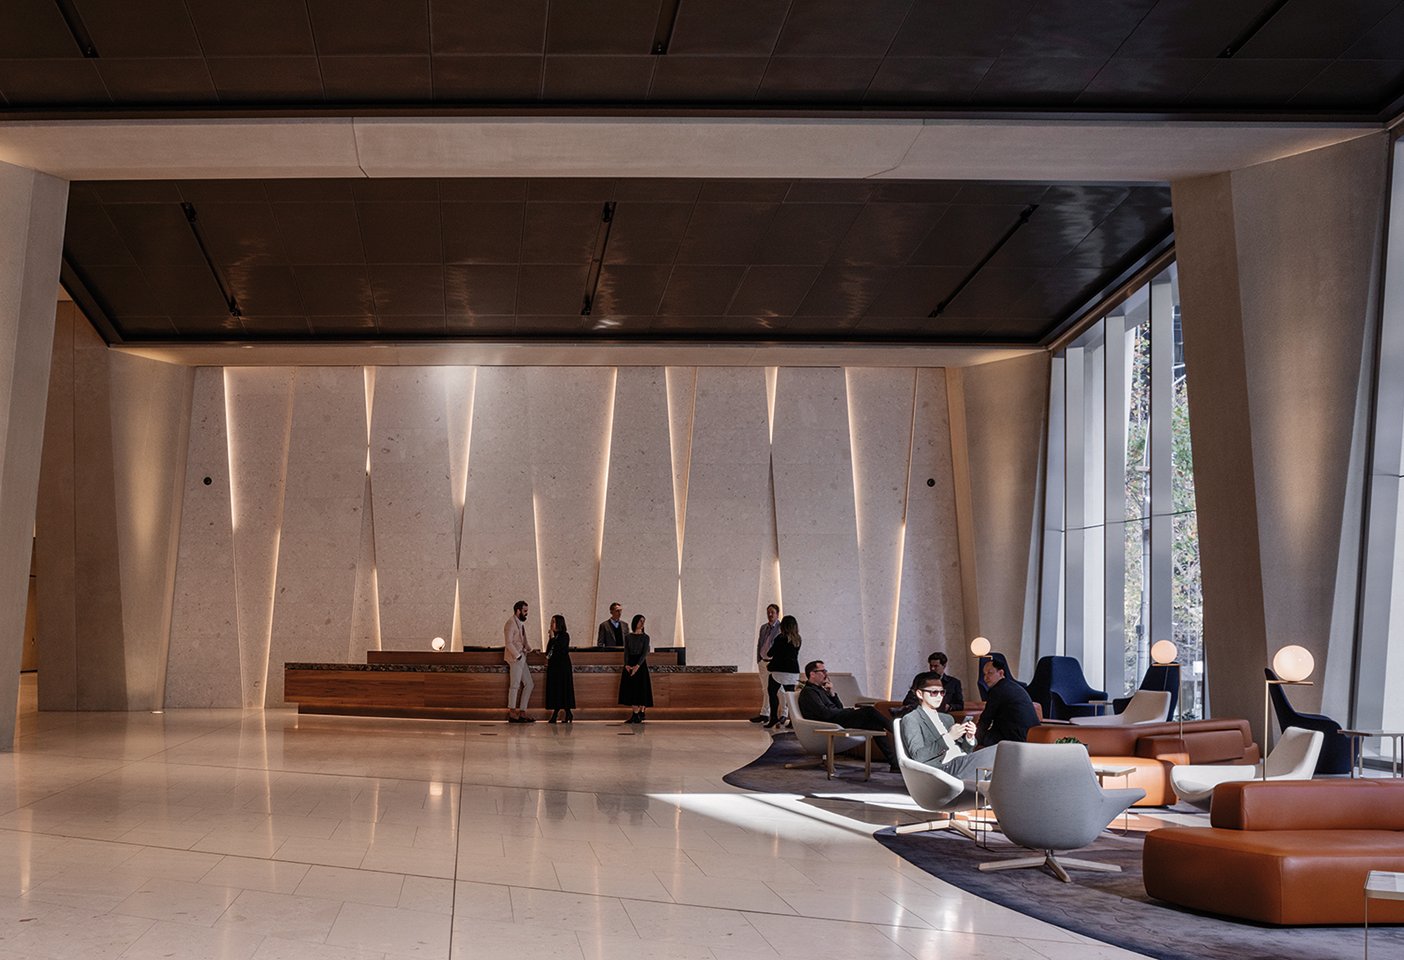 The commercial tower lobby with its expressive concrete form, and furniture by B&B Italia including the Harbor and Metropolitan armchairs. Photography © Trevor Mein.  